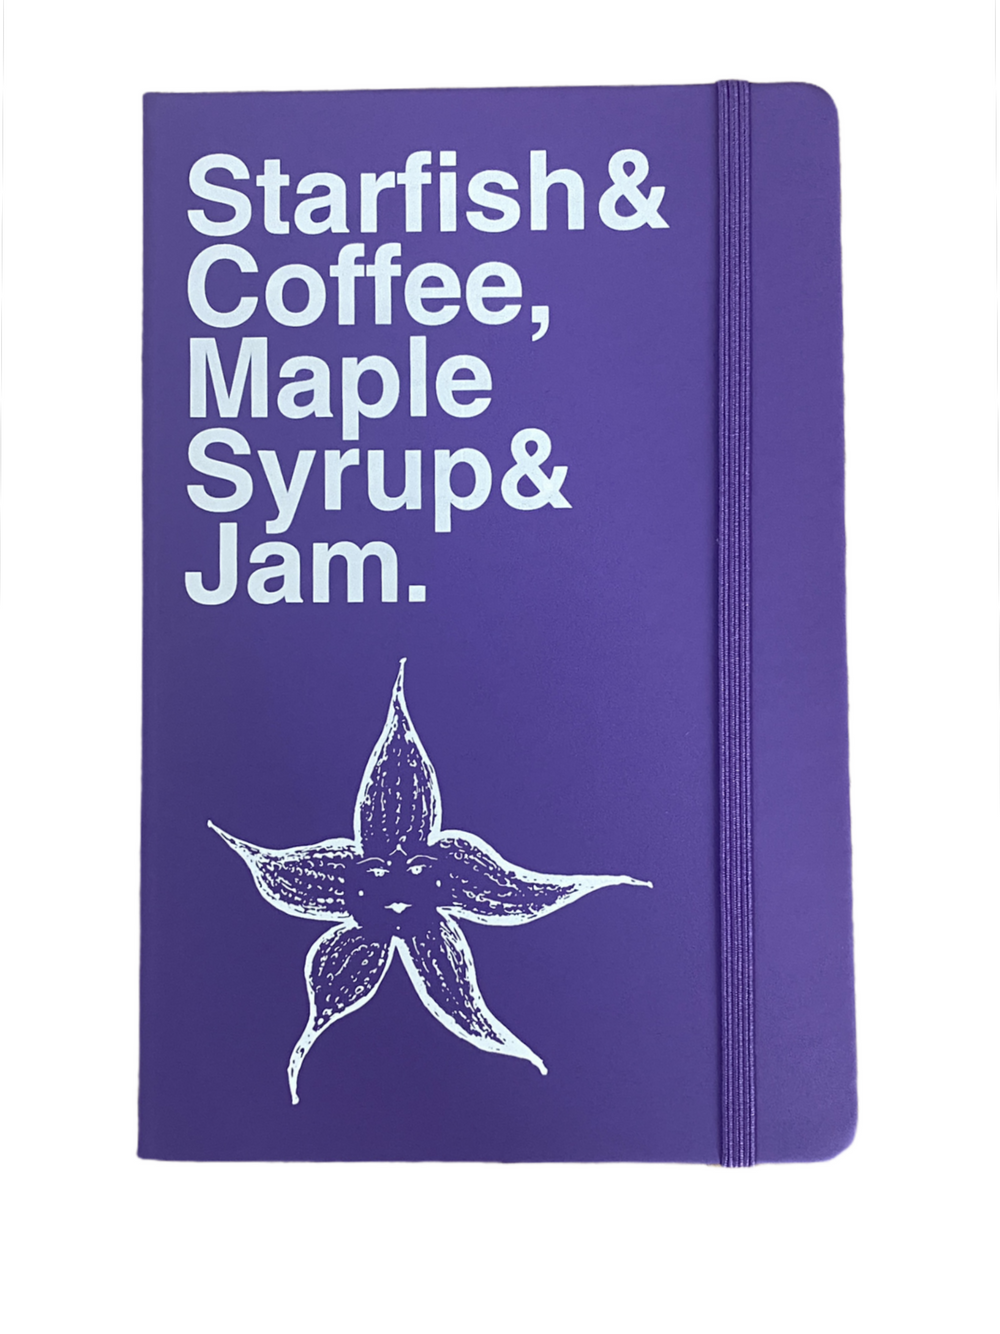 Prince – Starfish & Coffee Official Merchandise A5 Soft Touch Note Book Journal  Prince